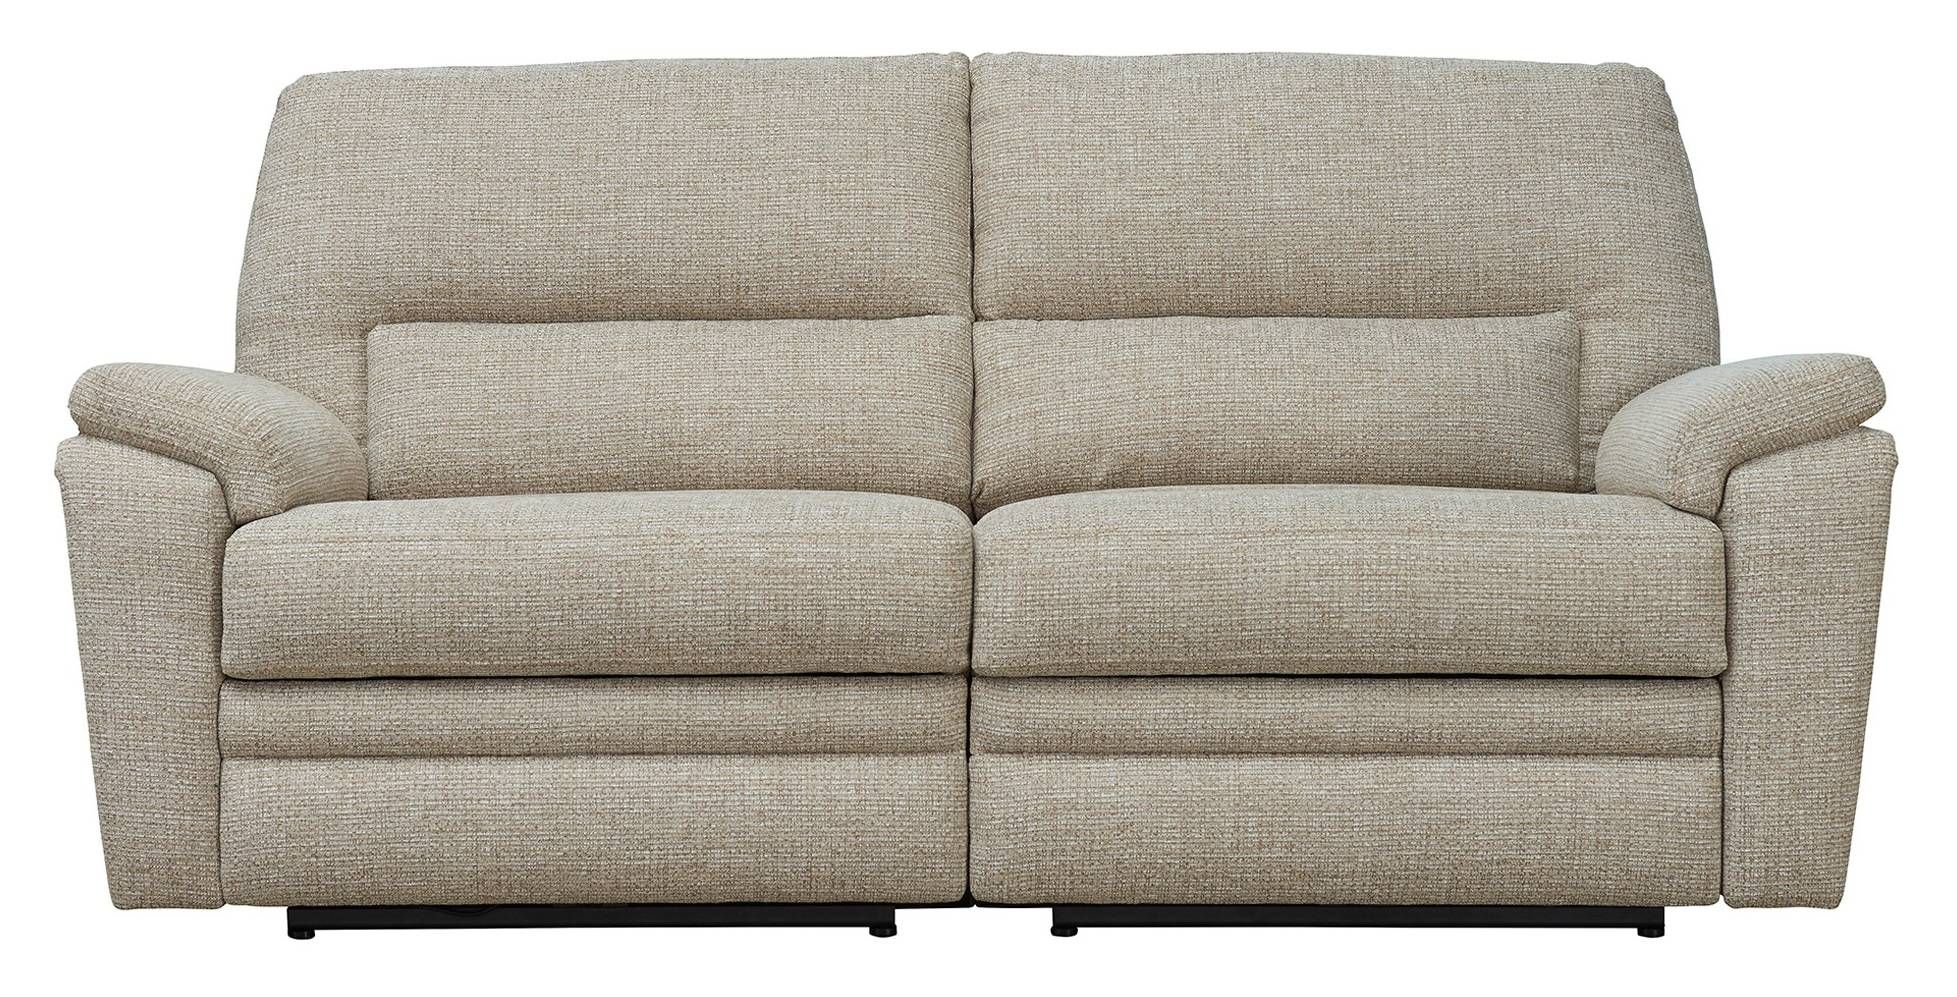 Parker Knoll Parker Knoll Hampton – Large 2 Seater Sofa A Pertaining To Hamptons Sofas (View 4 of 15)